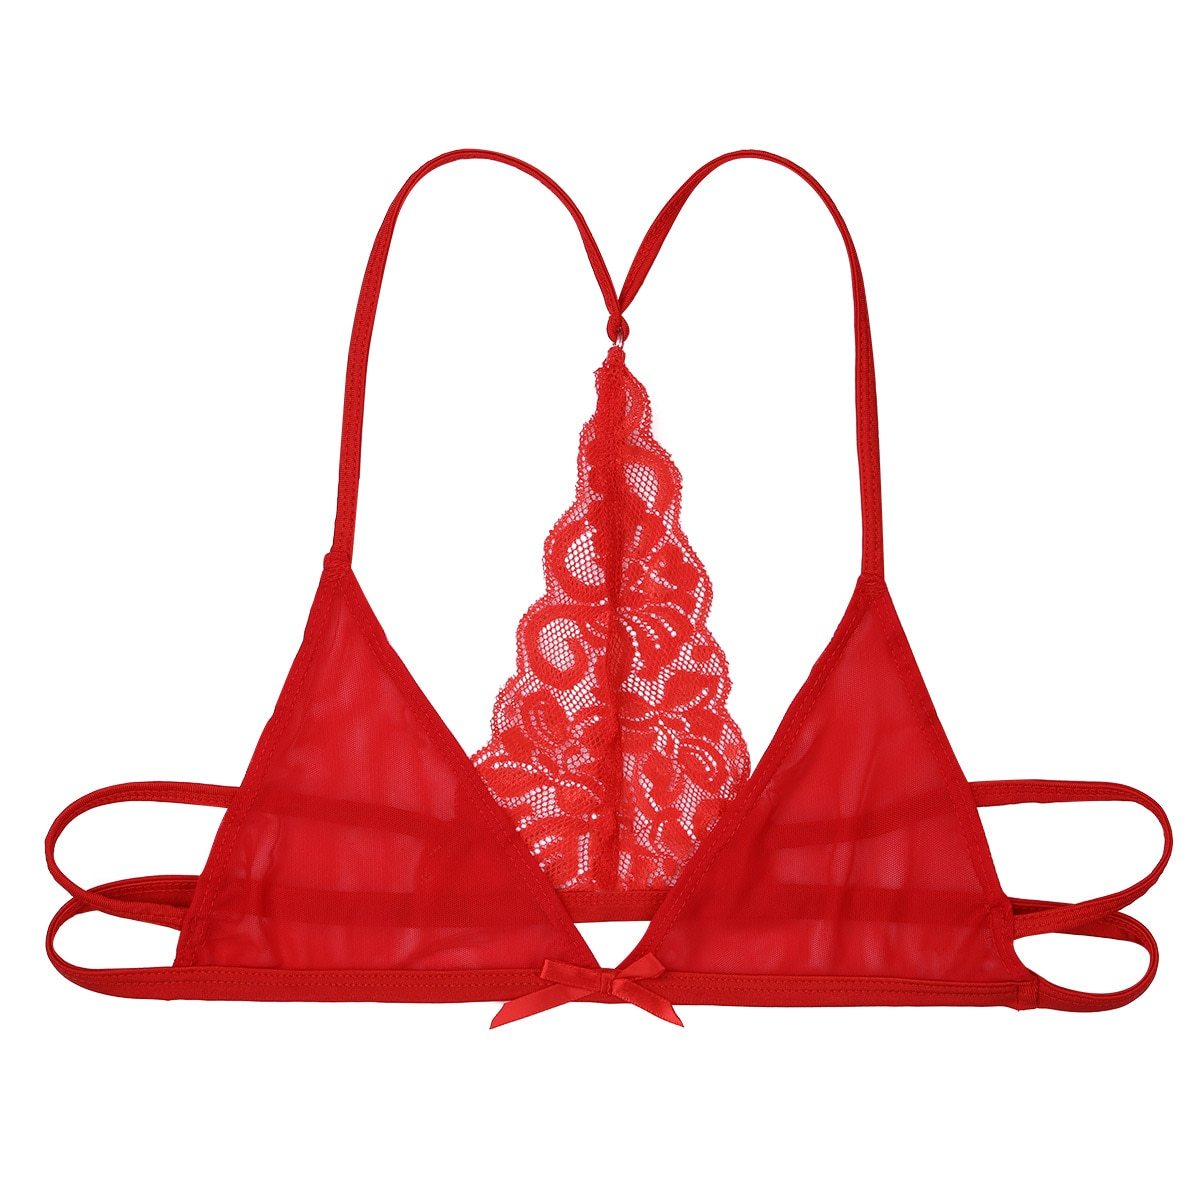 Mens Sissy Lingerie See Through Sheer Lace Bra Top with Y-shape Red